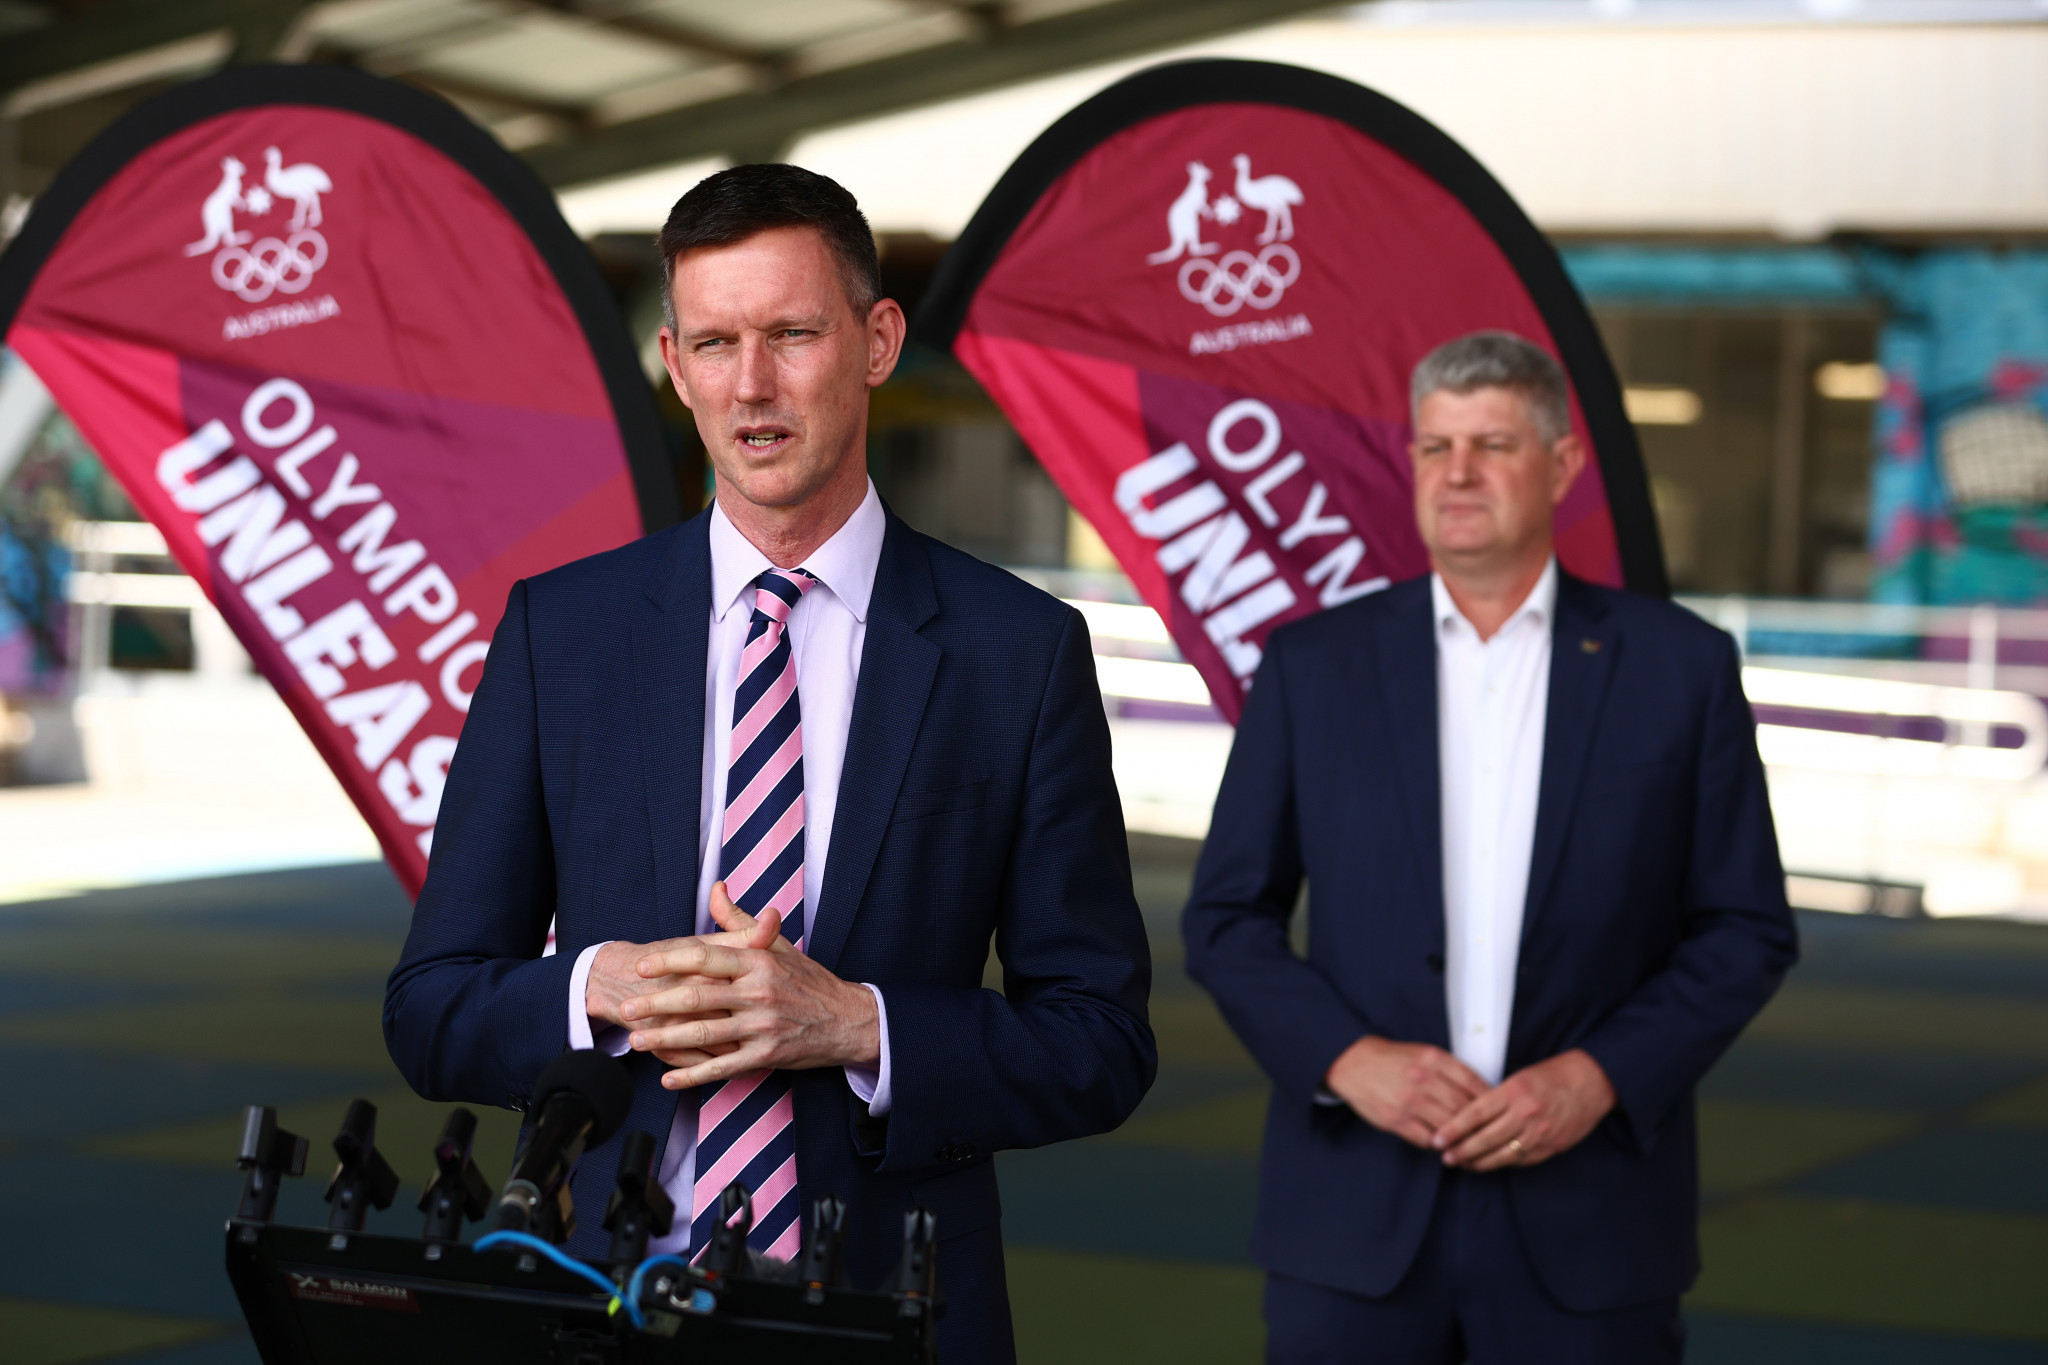 Minister of Transport Mark Bailey has dismissed any problems relating to traffic and said that similar worries were present before the Gold Coast 2014 Commonwealth Games ©Getty Images